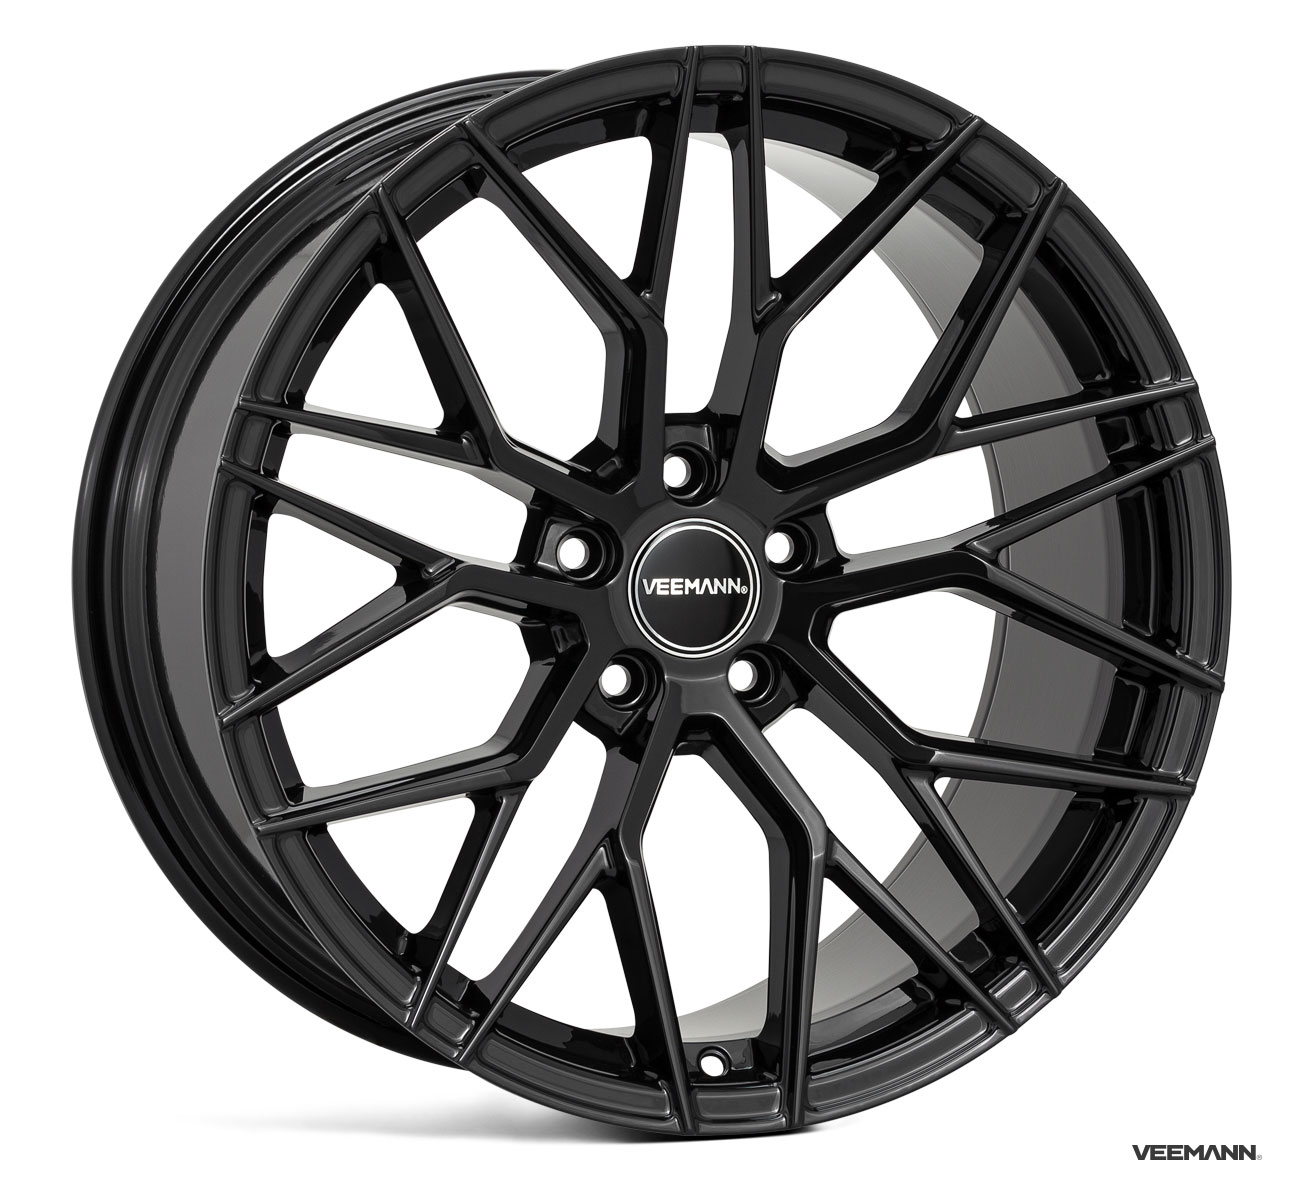 NEW 20" VEEMANN VC520 ALLOY WHEELS IN GLOSS BLACK WITH WIDER 10.5" REARS